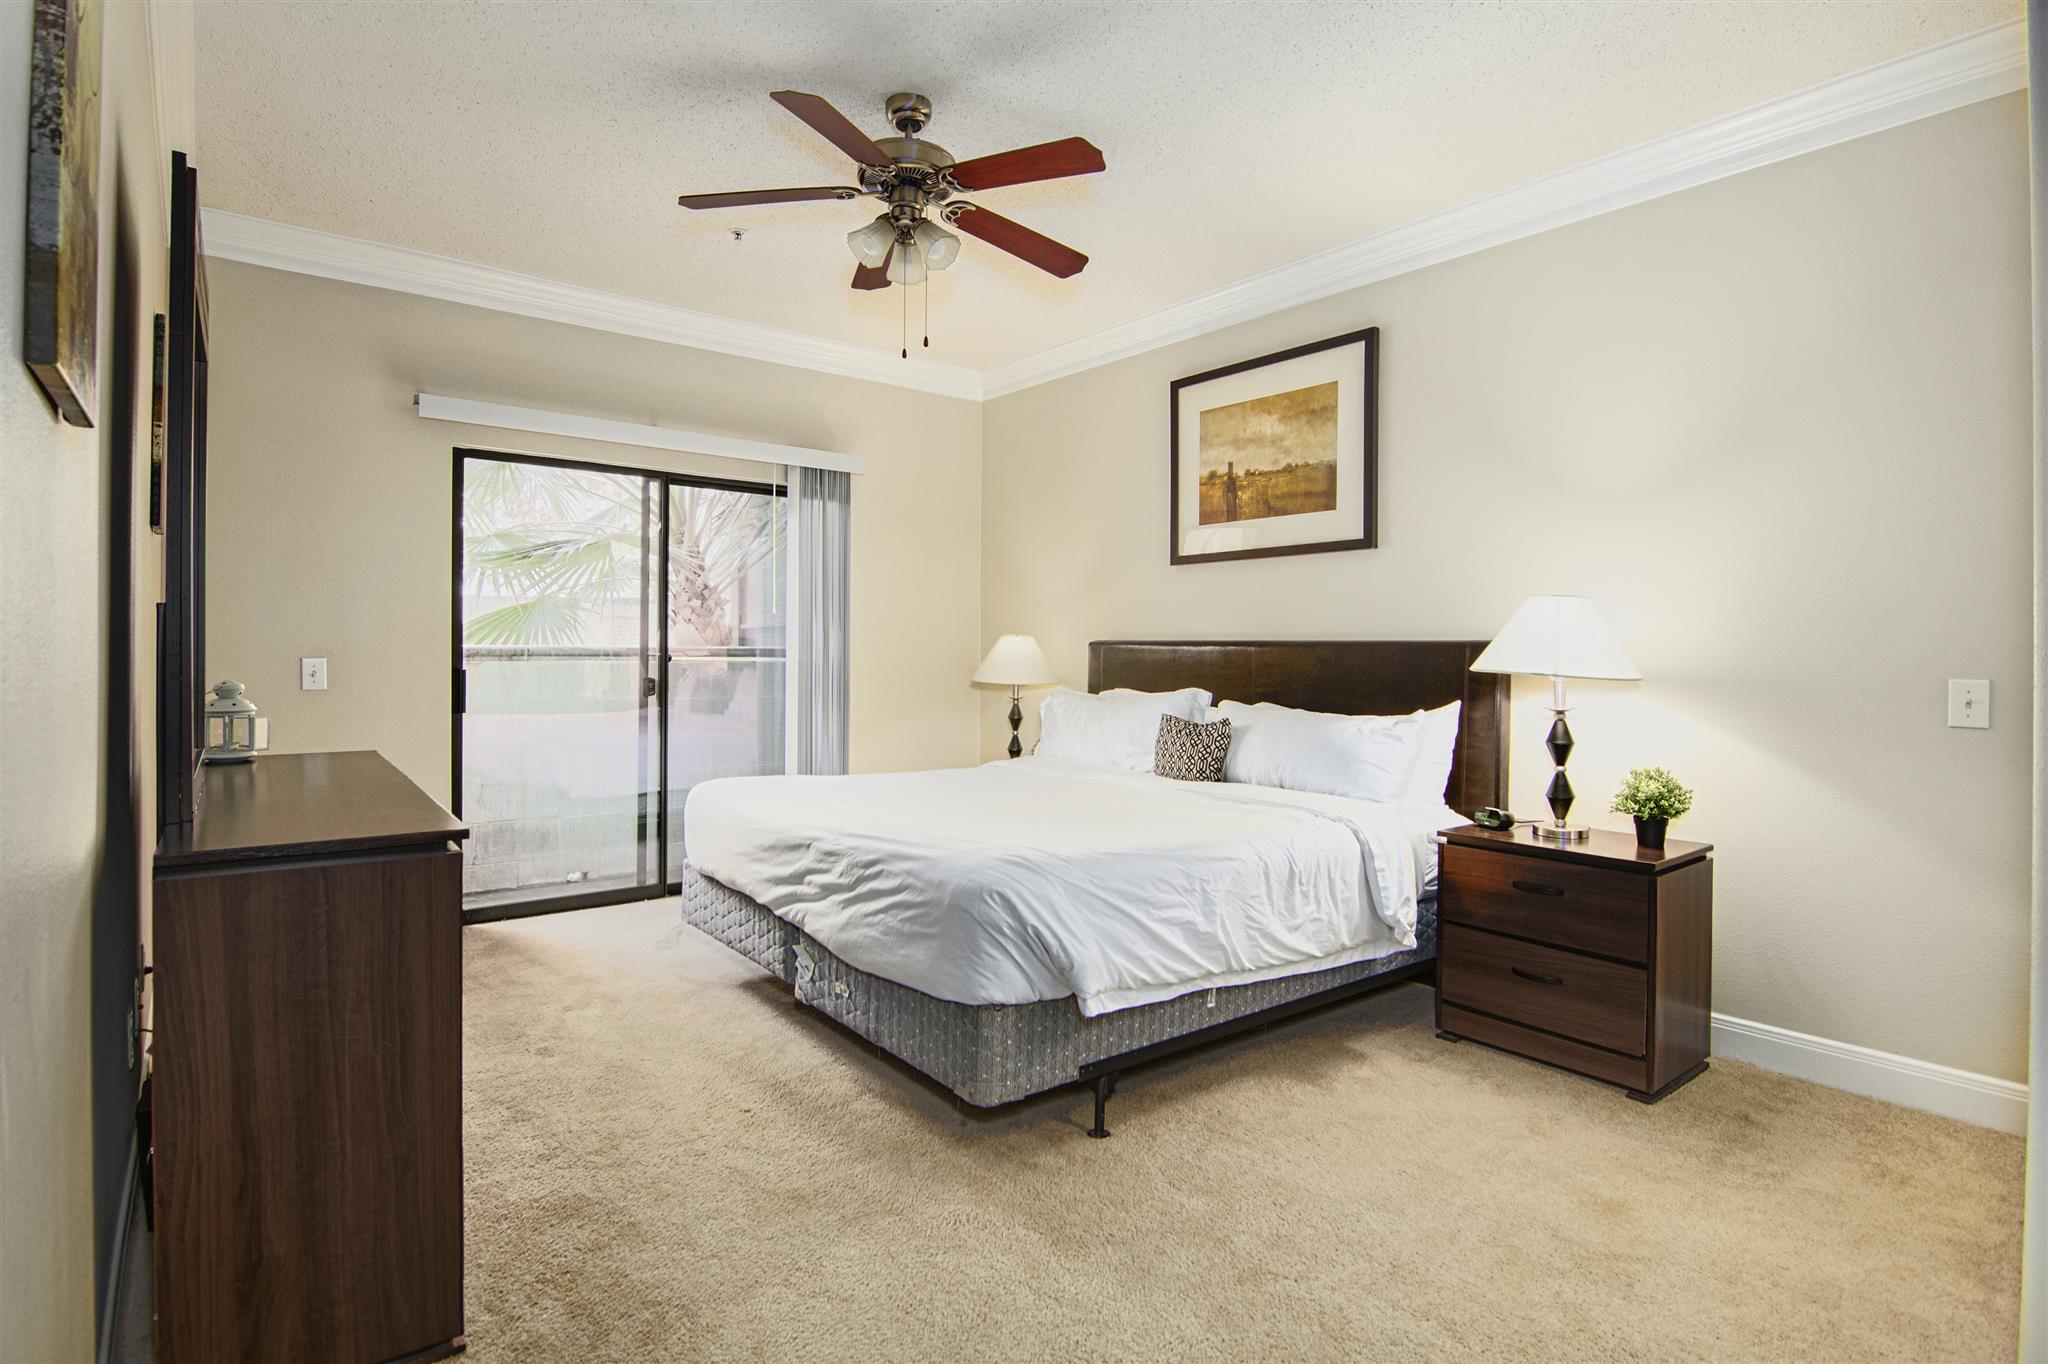 Furnished apartments & Corporate Housing | Galleria | Uptown